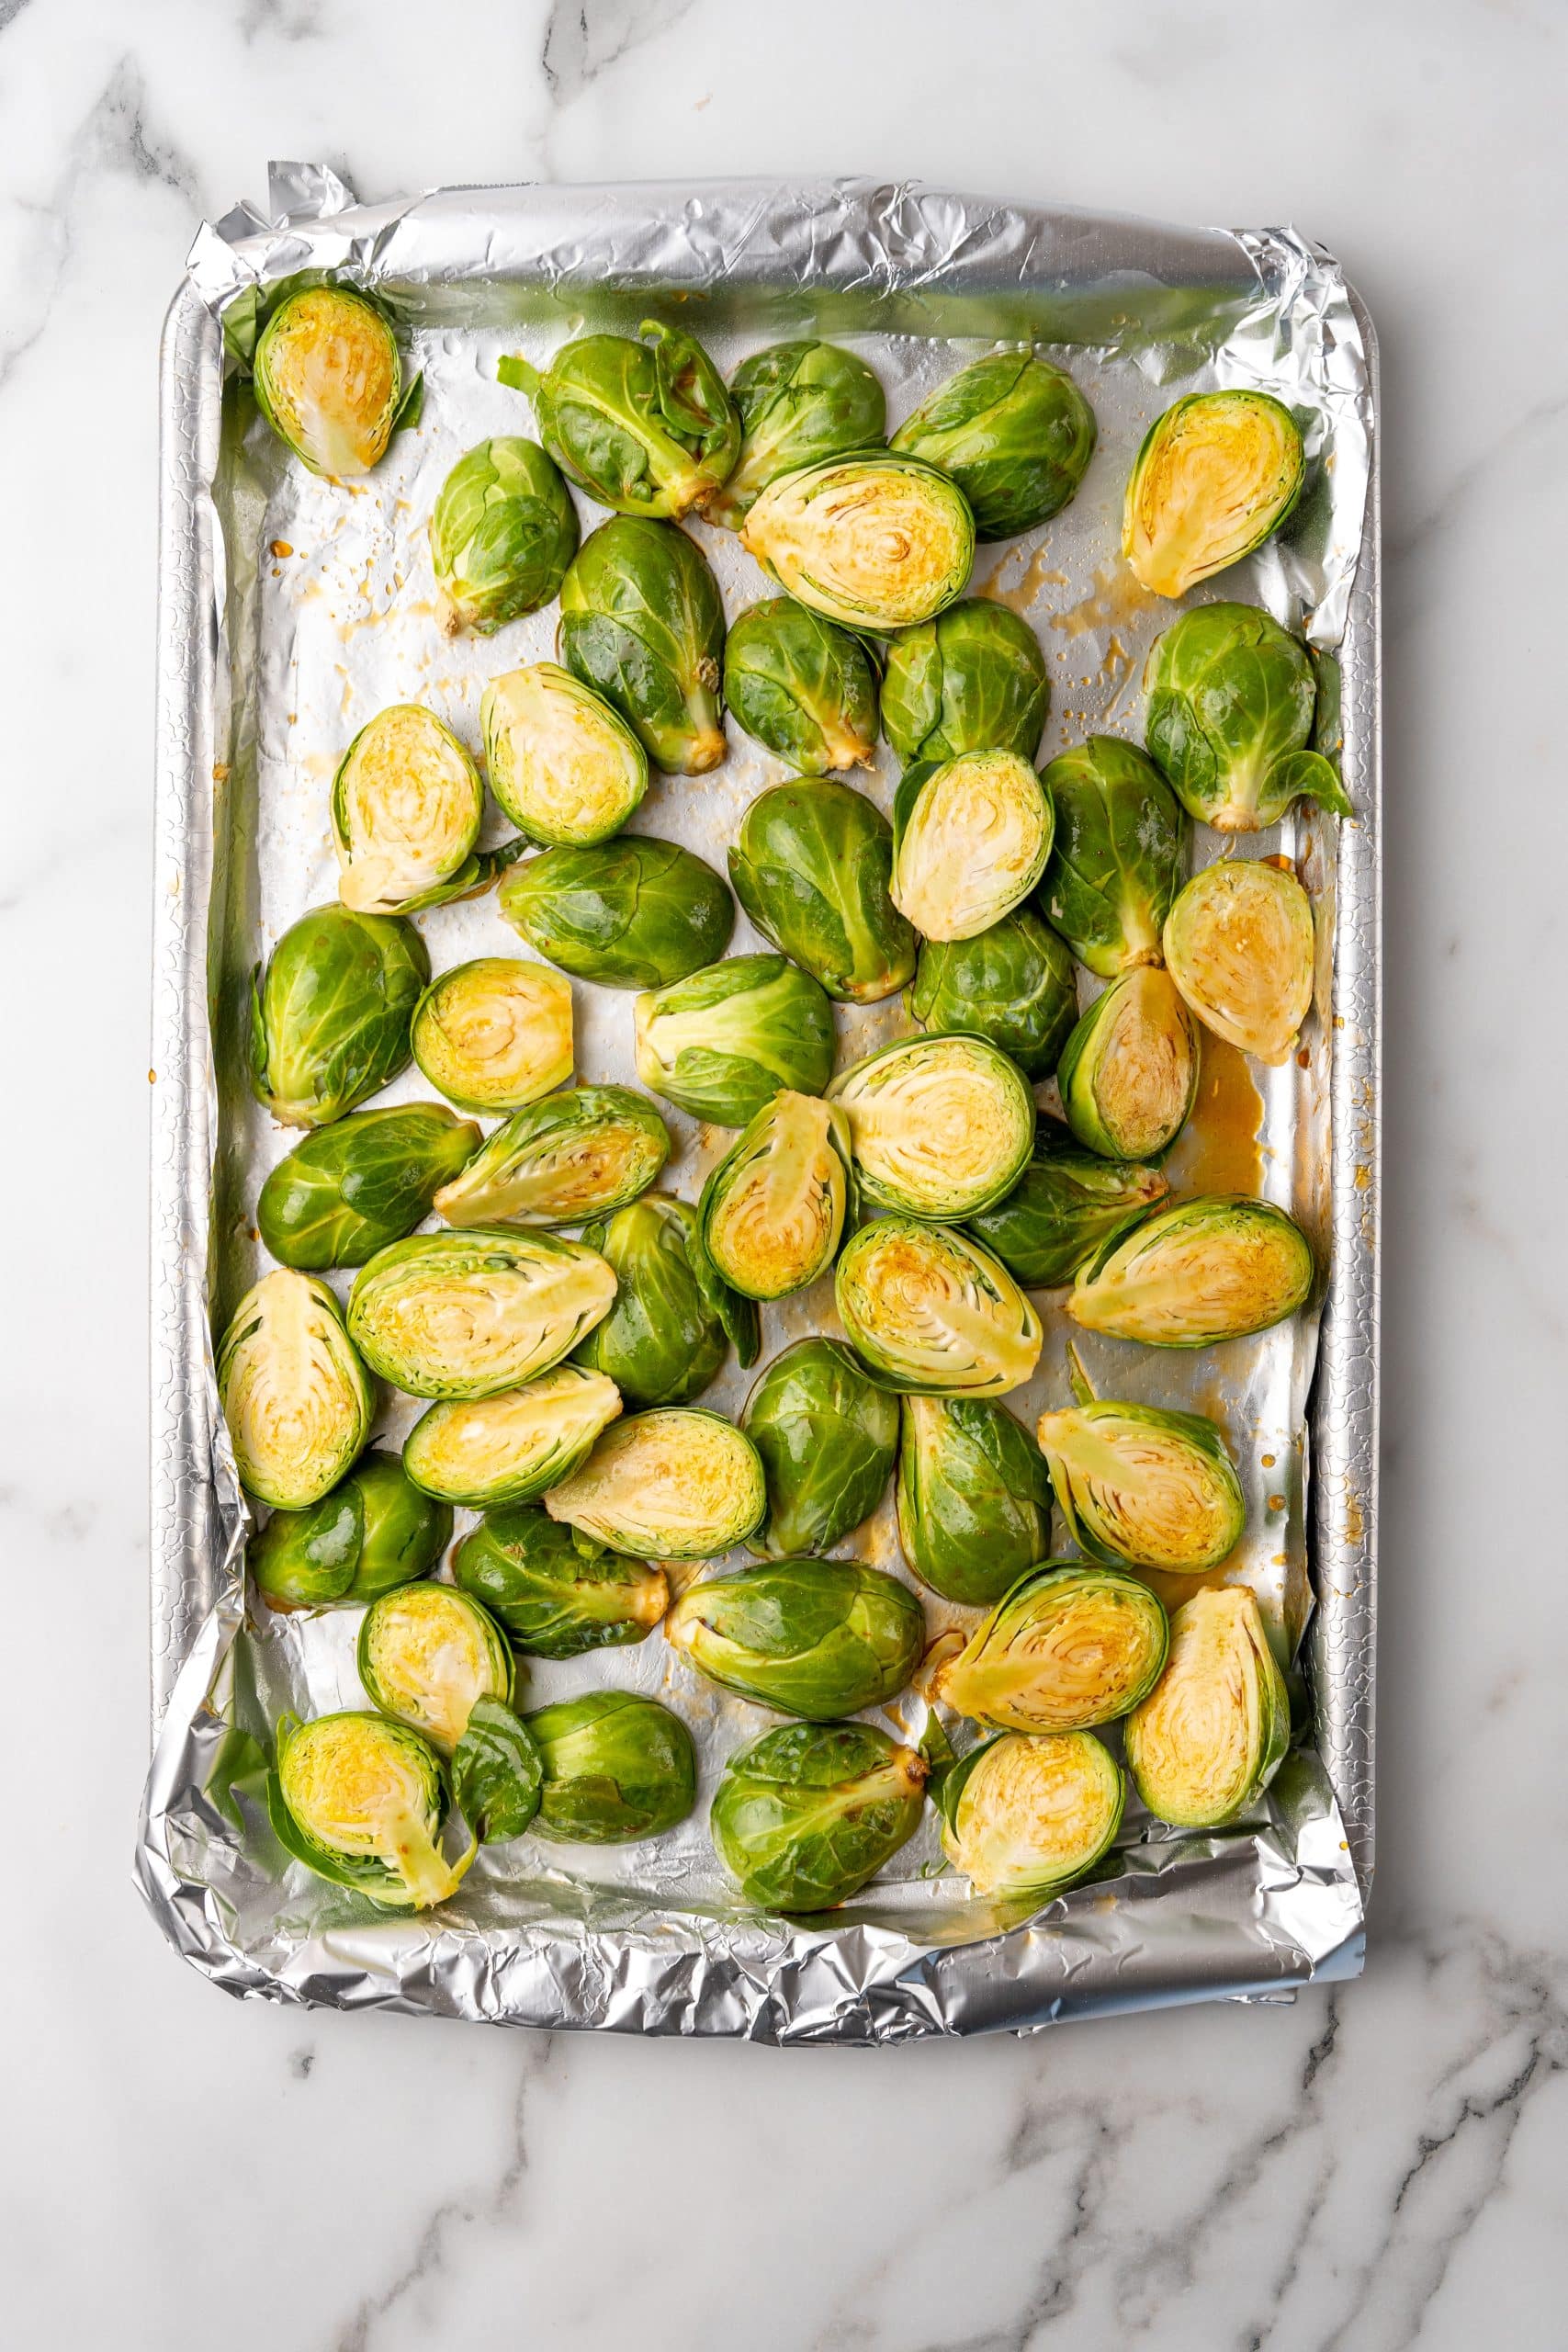 sauced brussels sprout halves on a foil lined baking tray